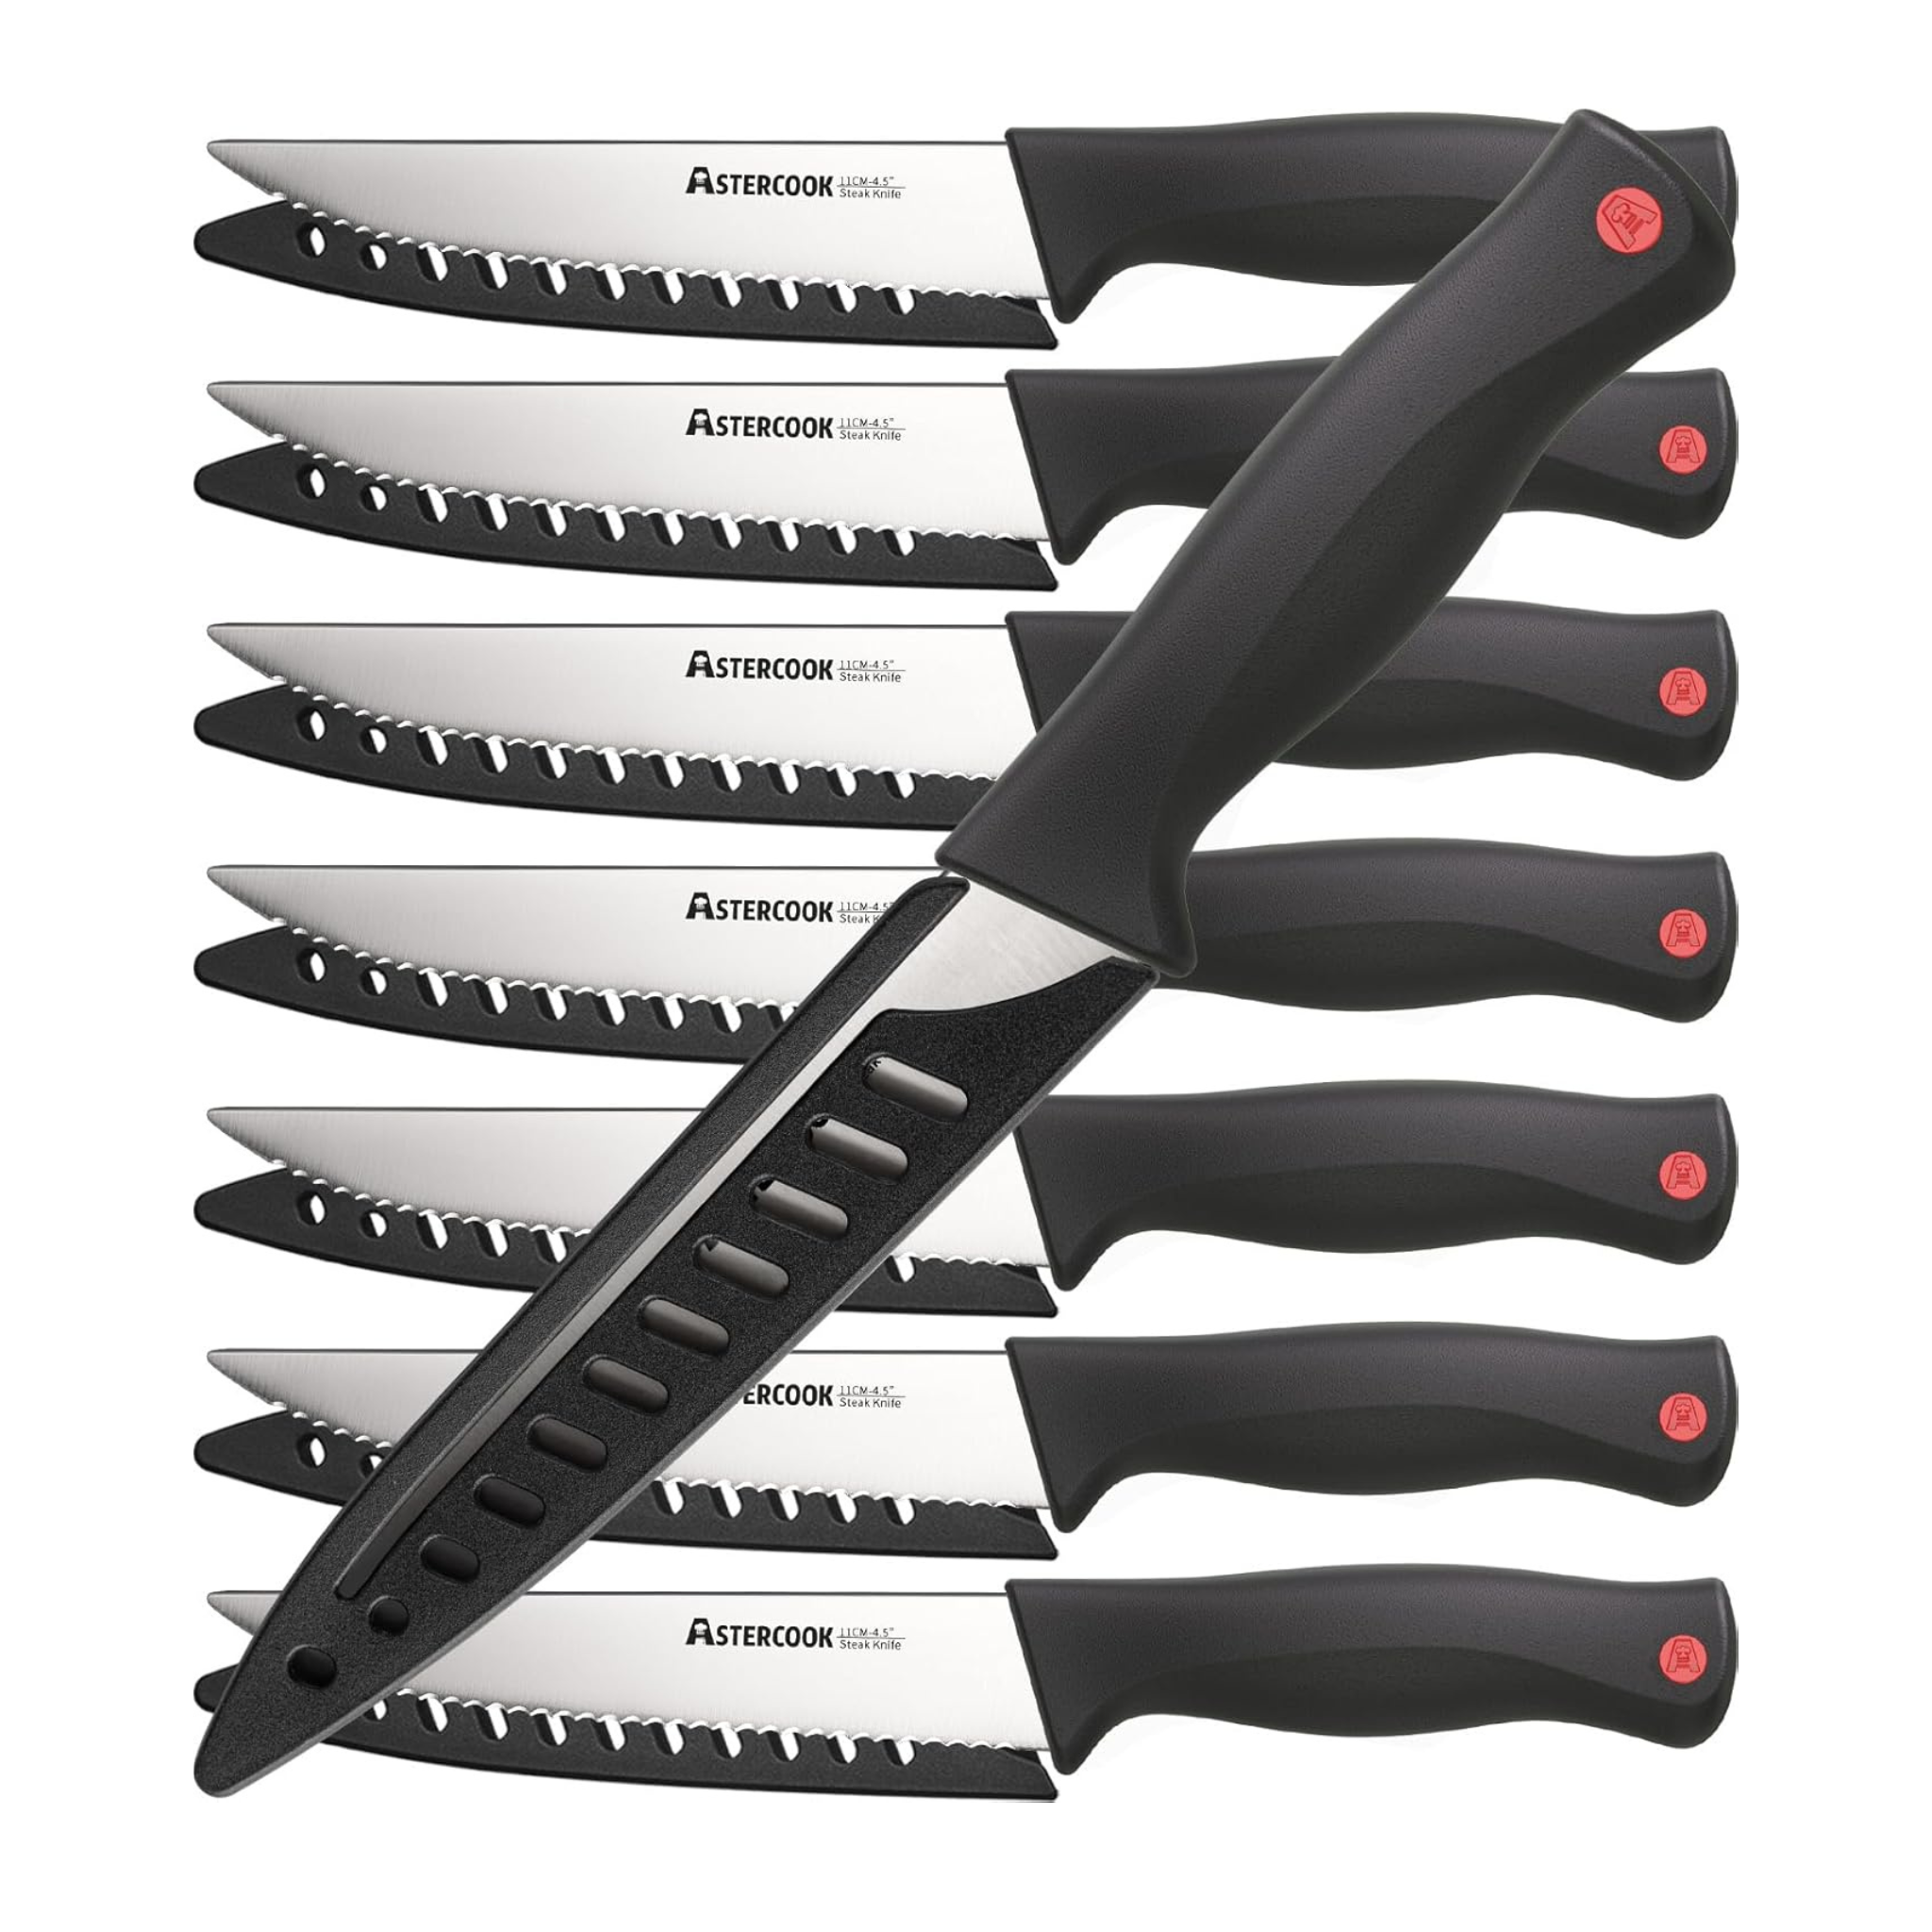 Set of 8 Steak Knives with Sheath